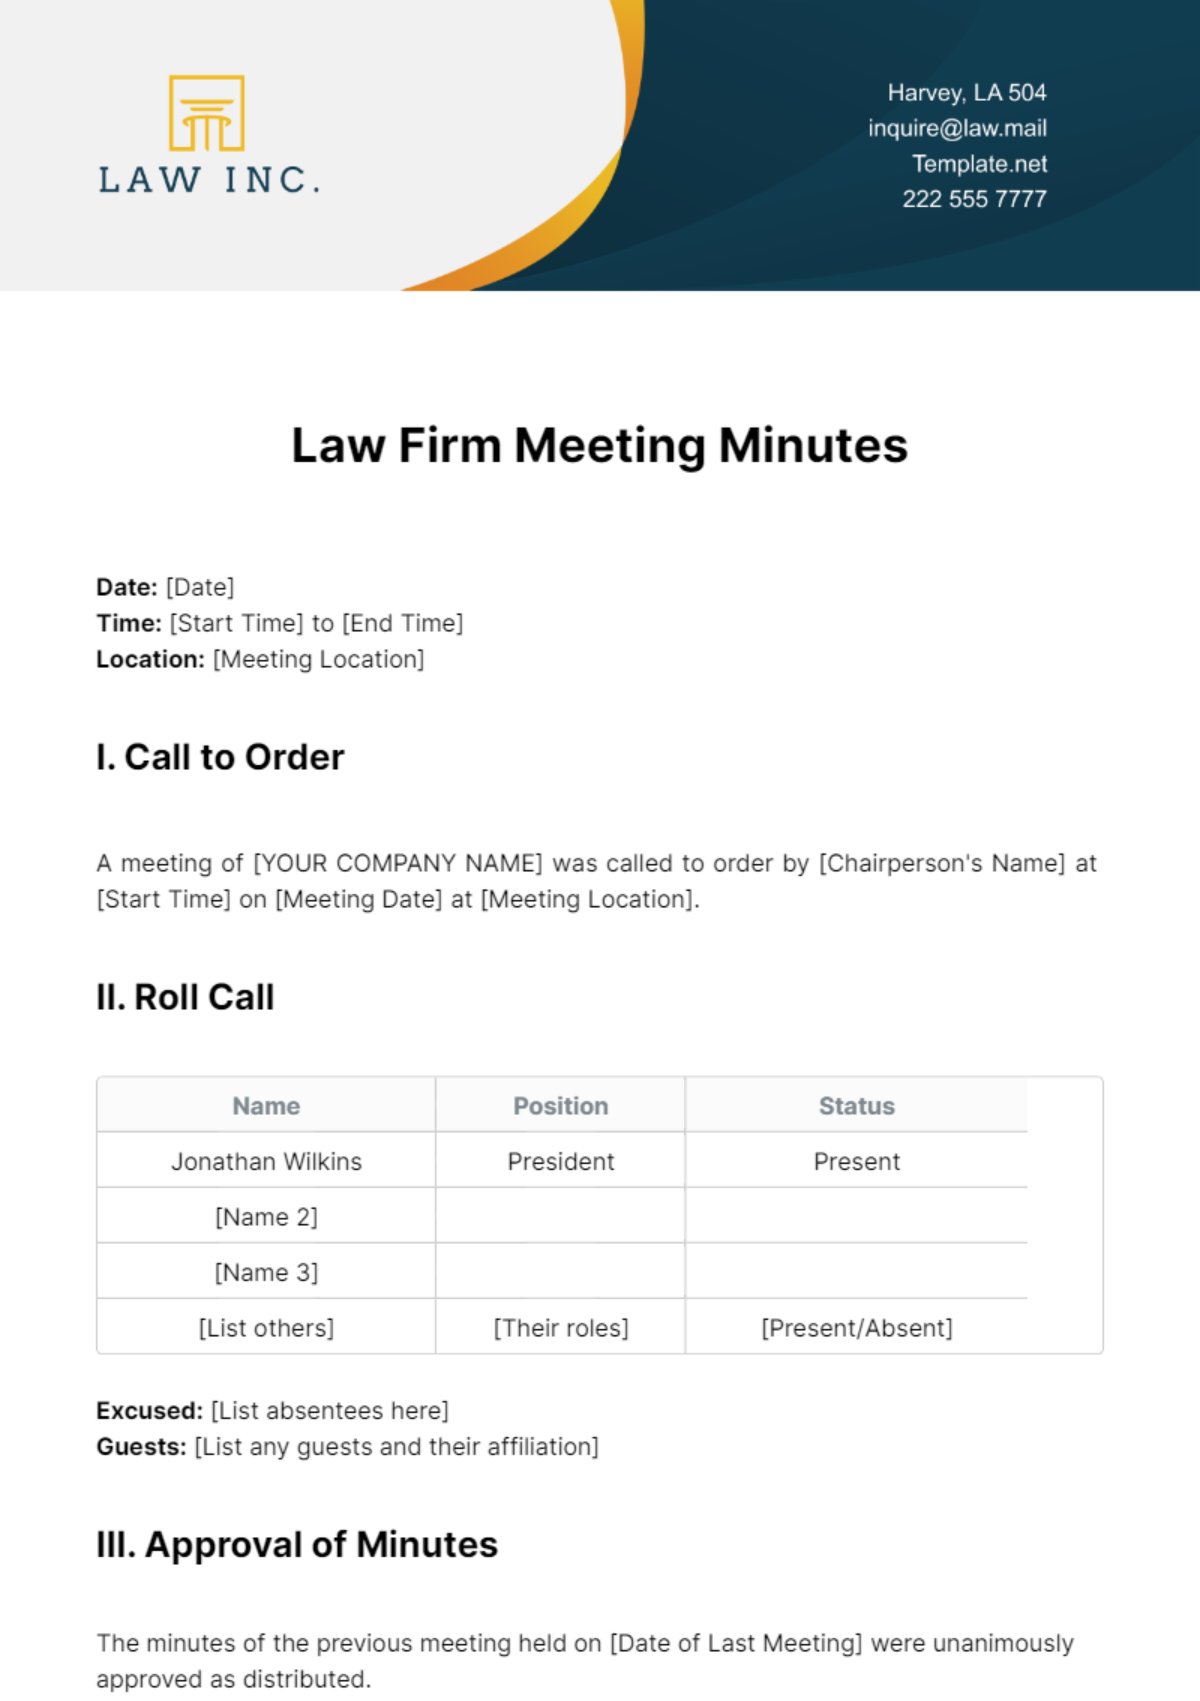 Law Firm Legal Meeting Minutes Template